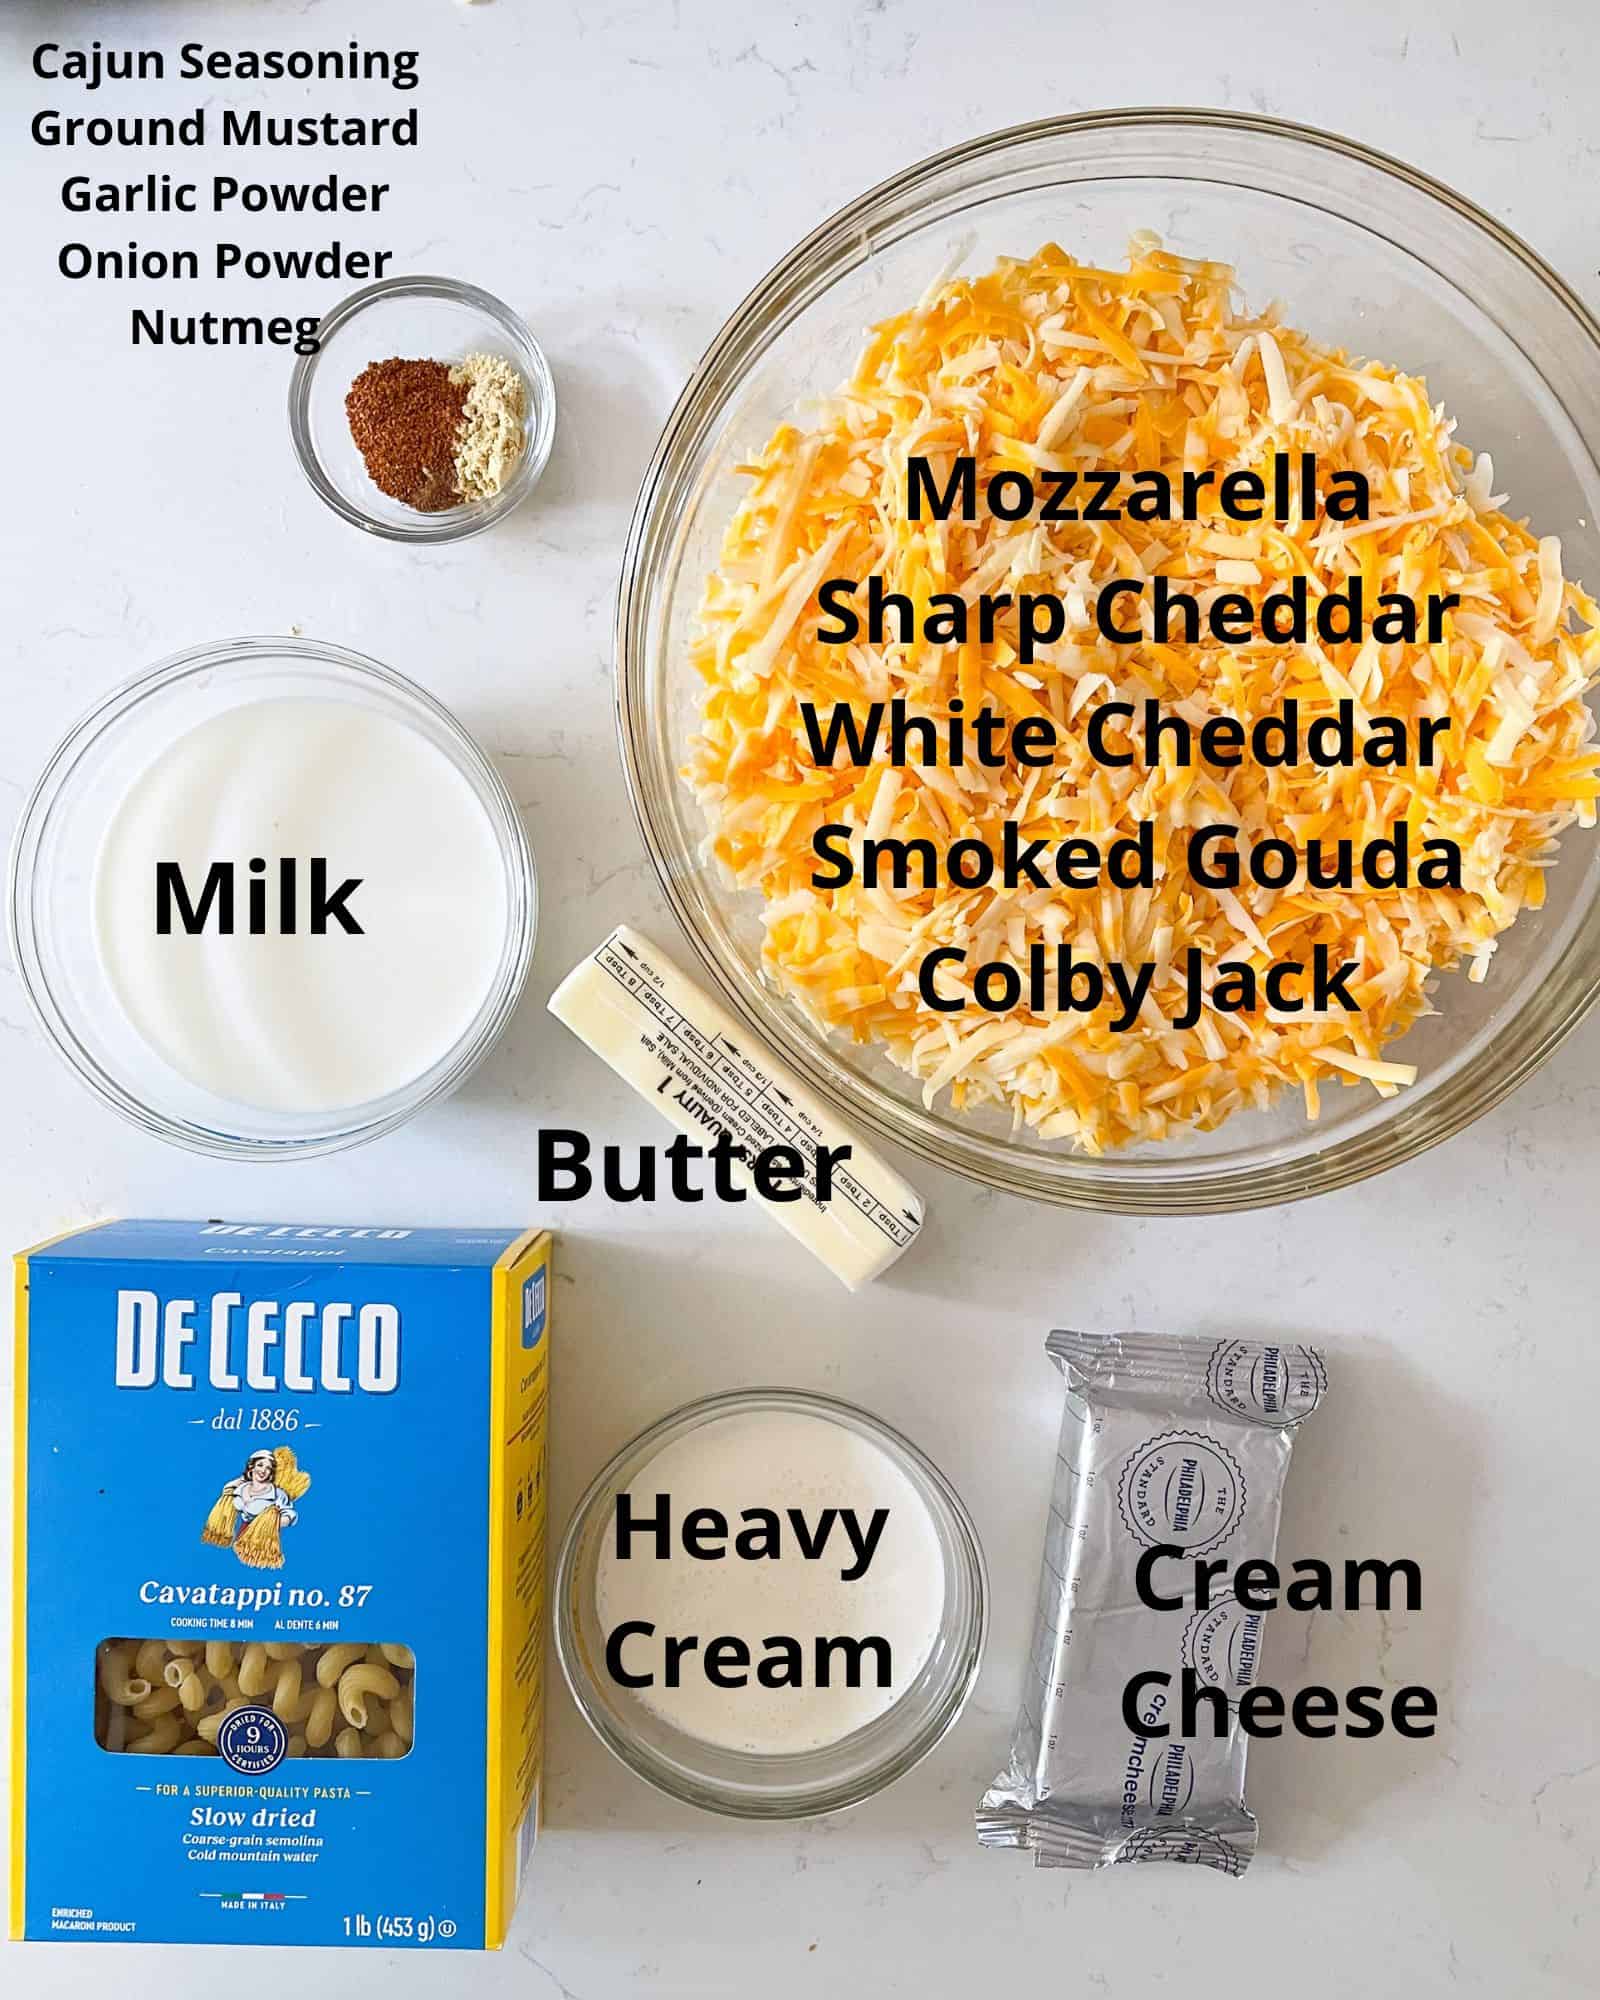 ingredients to make smoked mac and cheese - mozzarella, sharp cheddar cheese, white cheddar cheese, smoked gouda cheese, colby jack, milk, heavy cream, cream cheese, cajun seasoning, ground mustard, garlic powder, onion powder, salt and pepper, and elbow or cavatappi noodles.